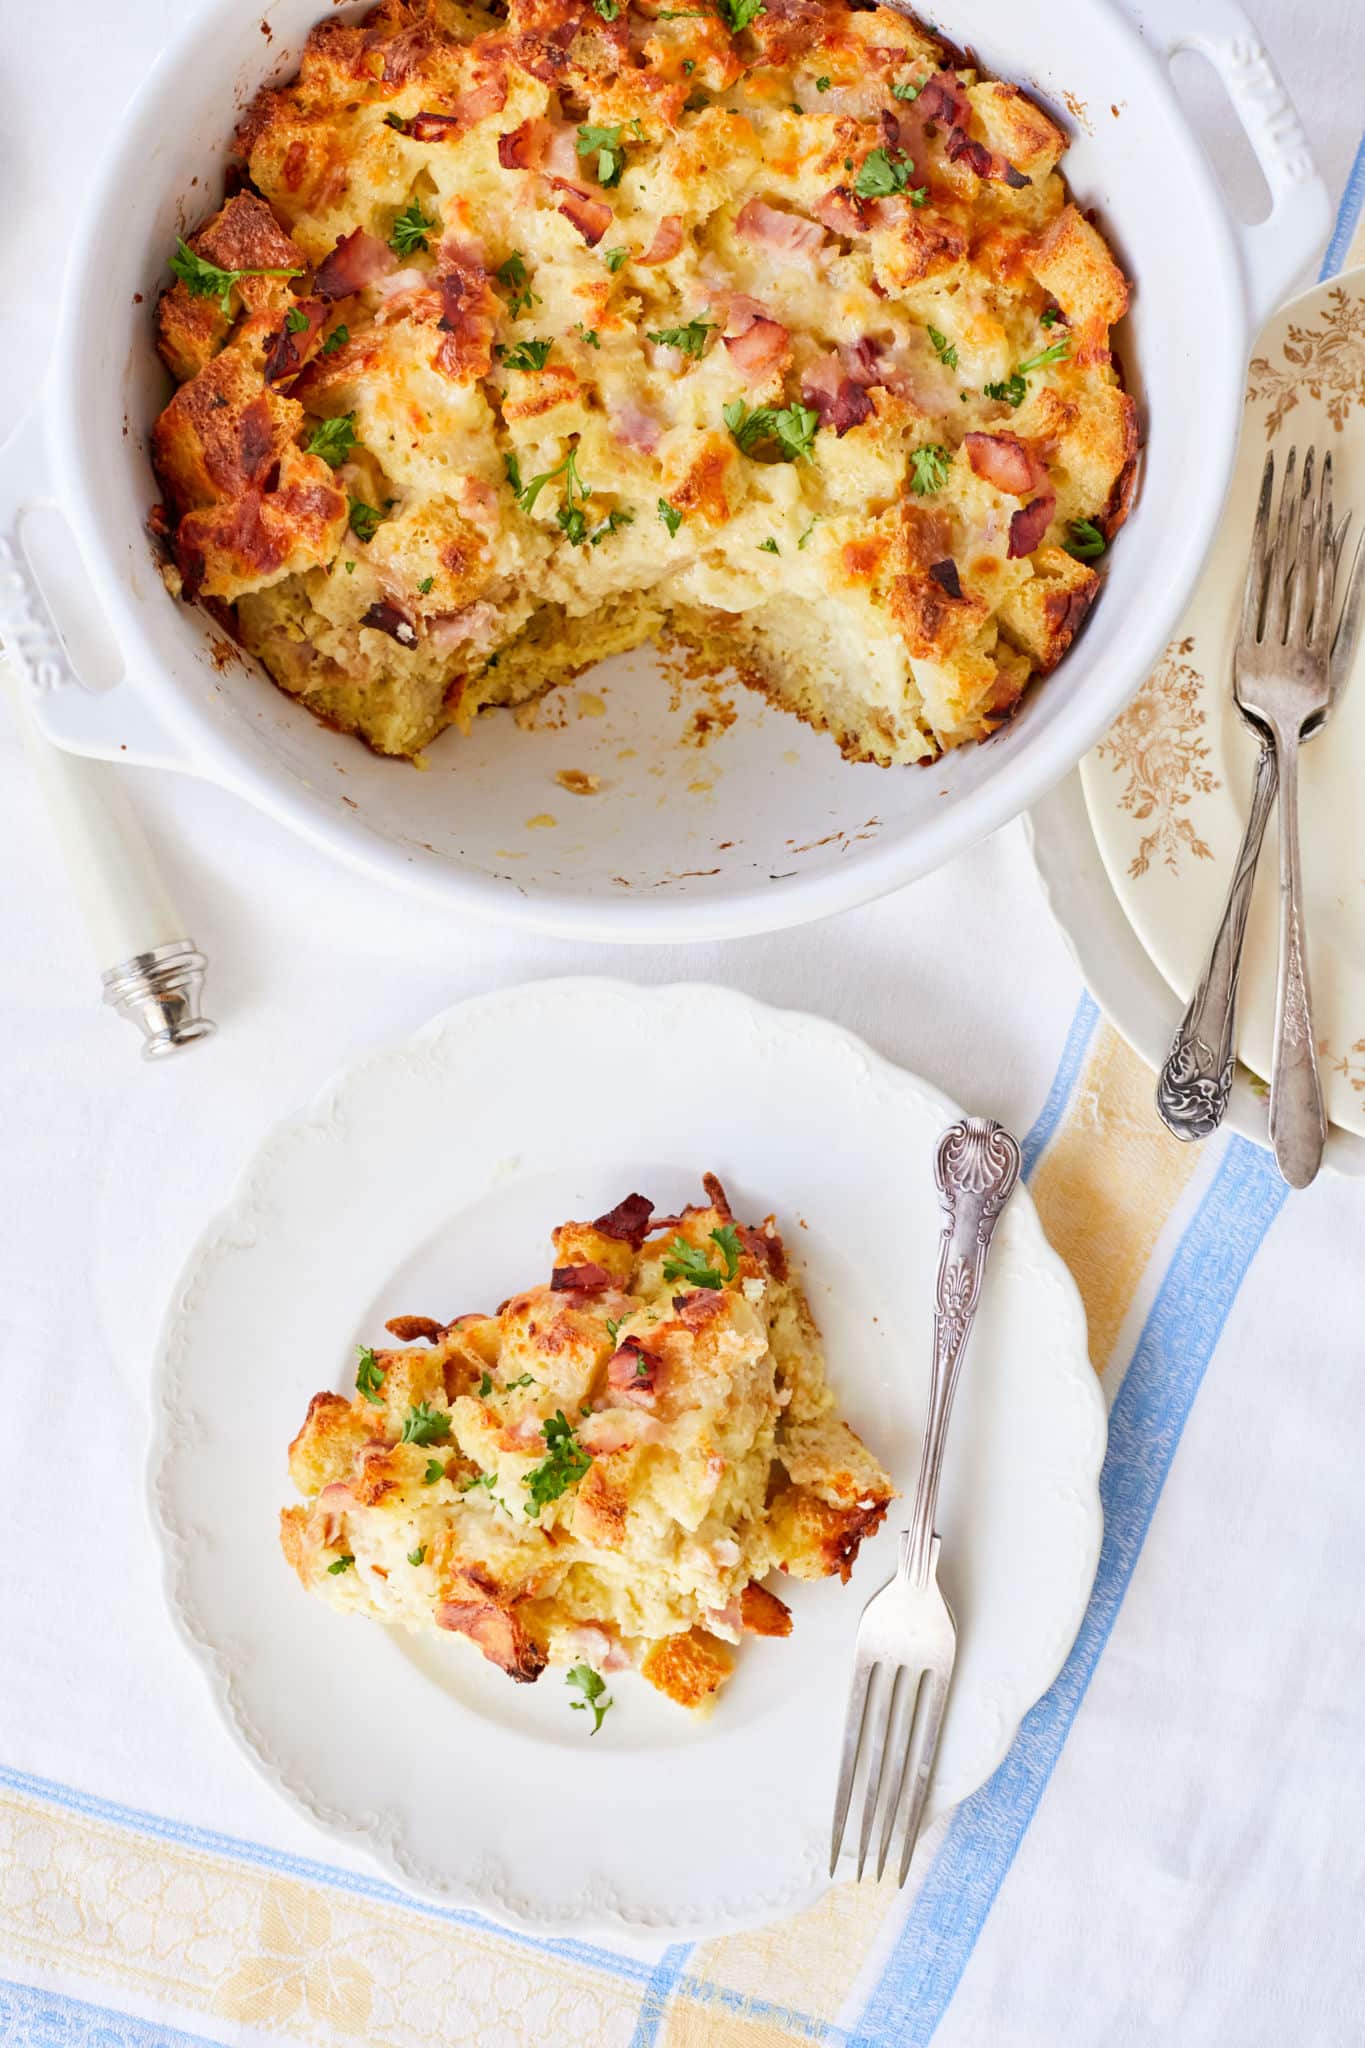 Savory bread pudding portioned onto a plate